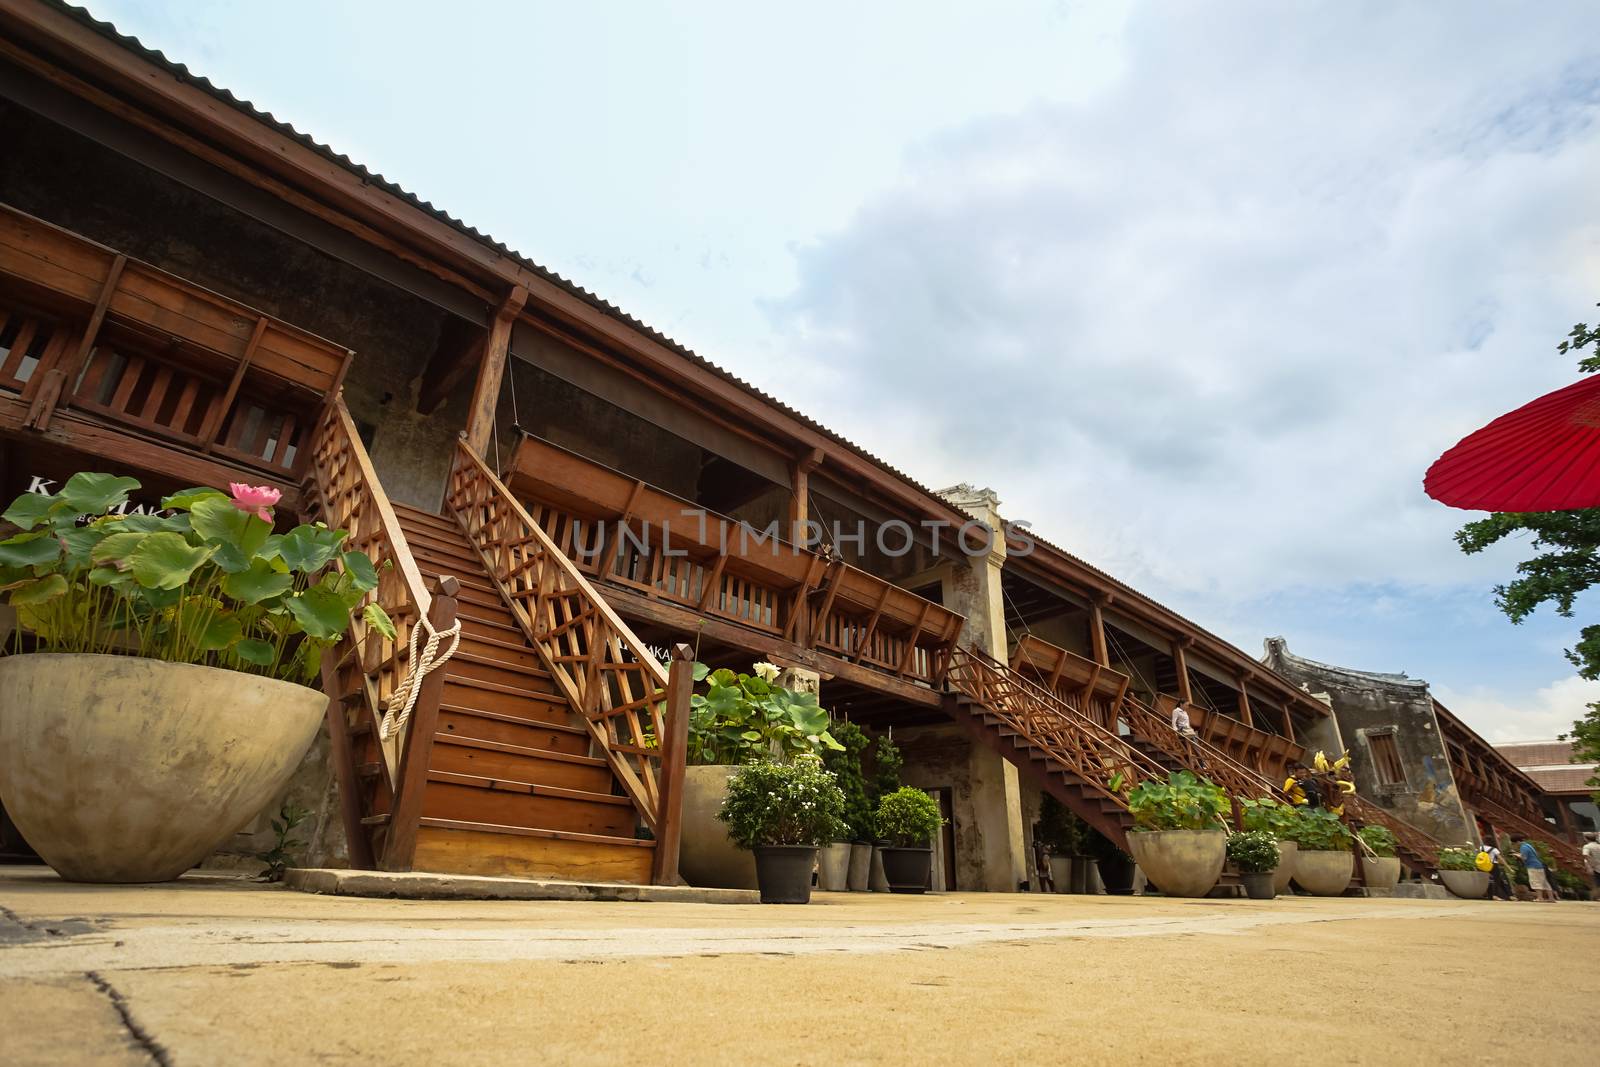 Bangkok, Thailand - September 2, 2018: Inside the new travel deatination in Bangkok Lhong 1919. The old pier in the past became to a new attraction in Bangkok, Thailand.